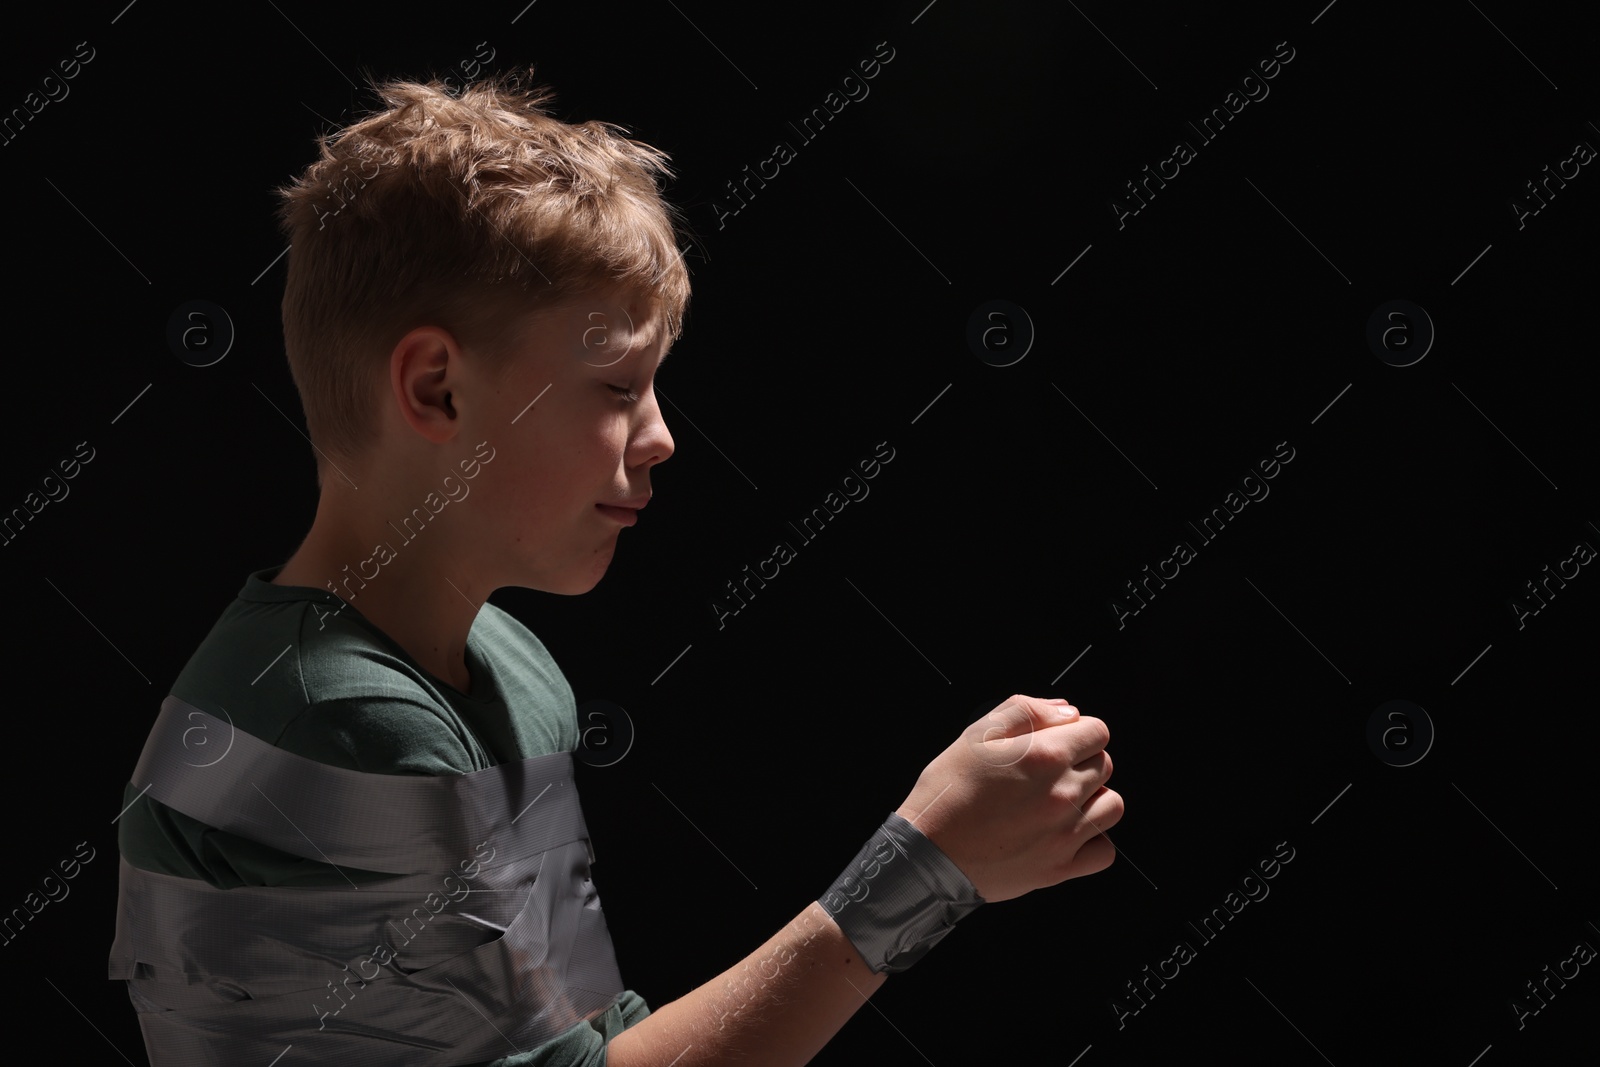 Photo of Little boy tied up and taken hostage on dark background. Space for text